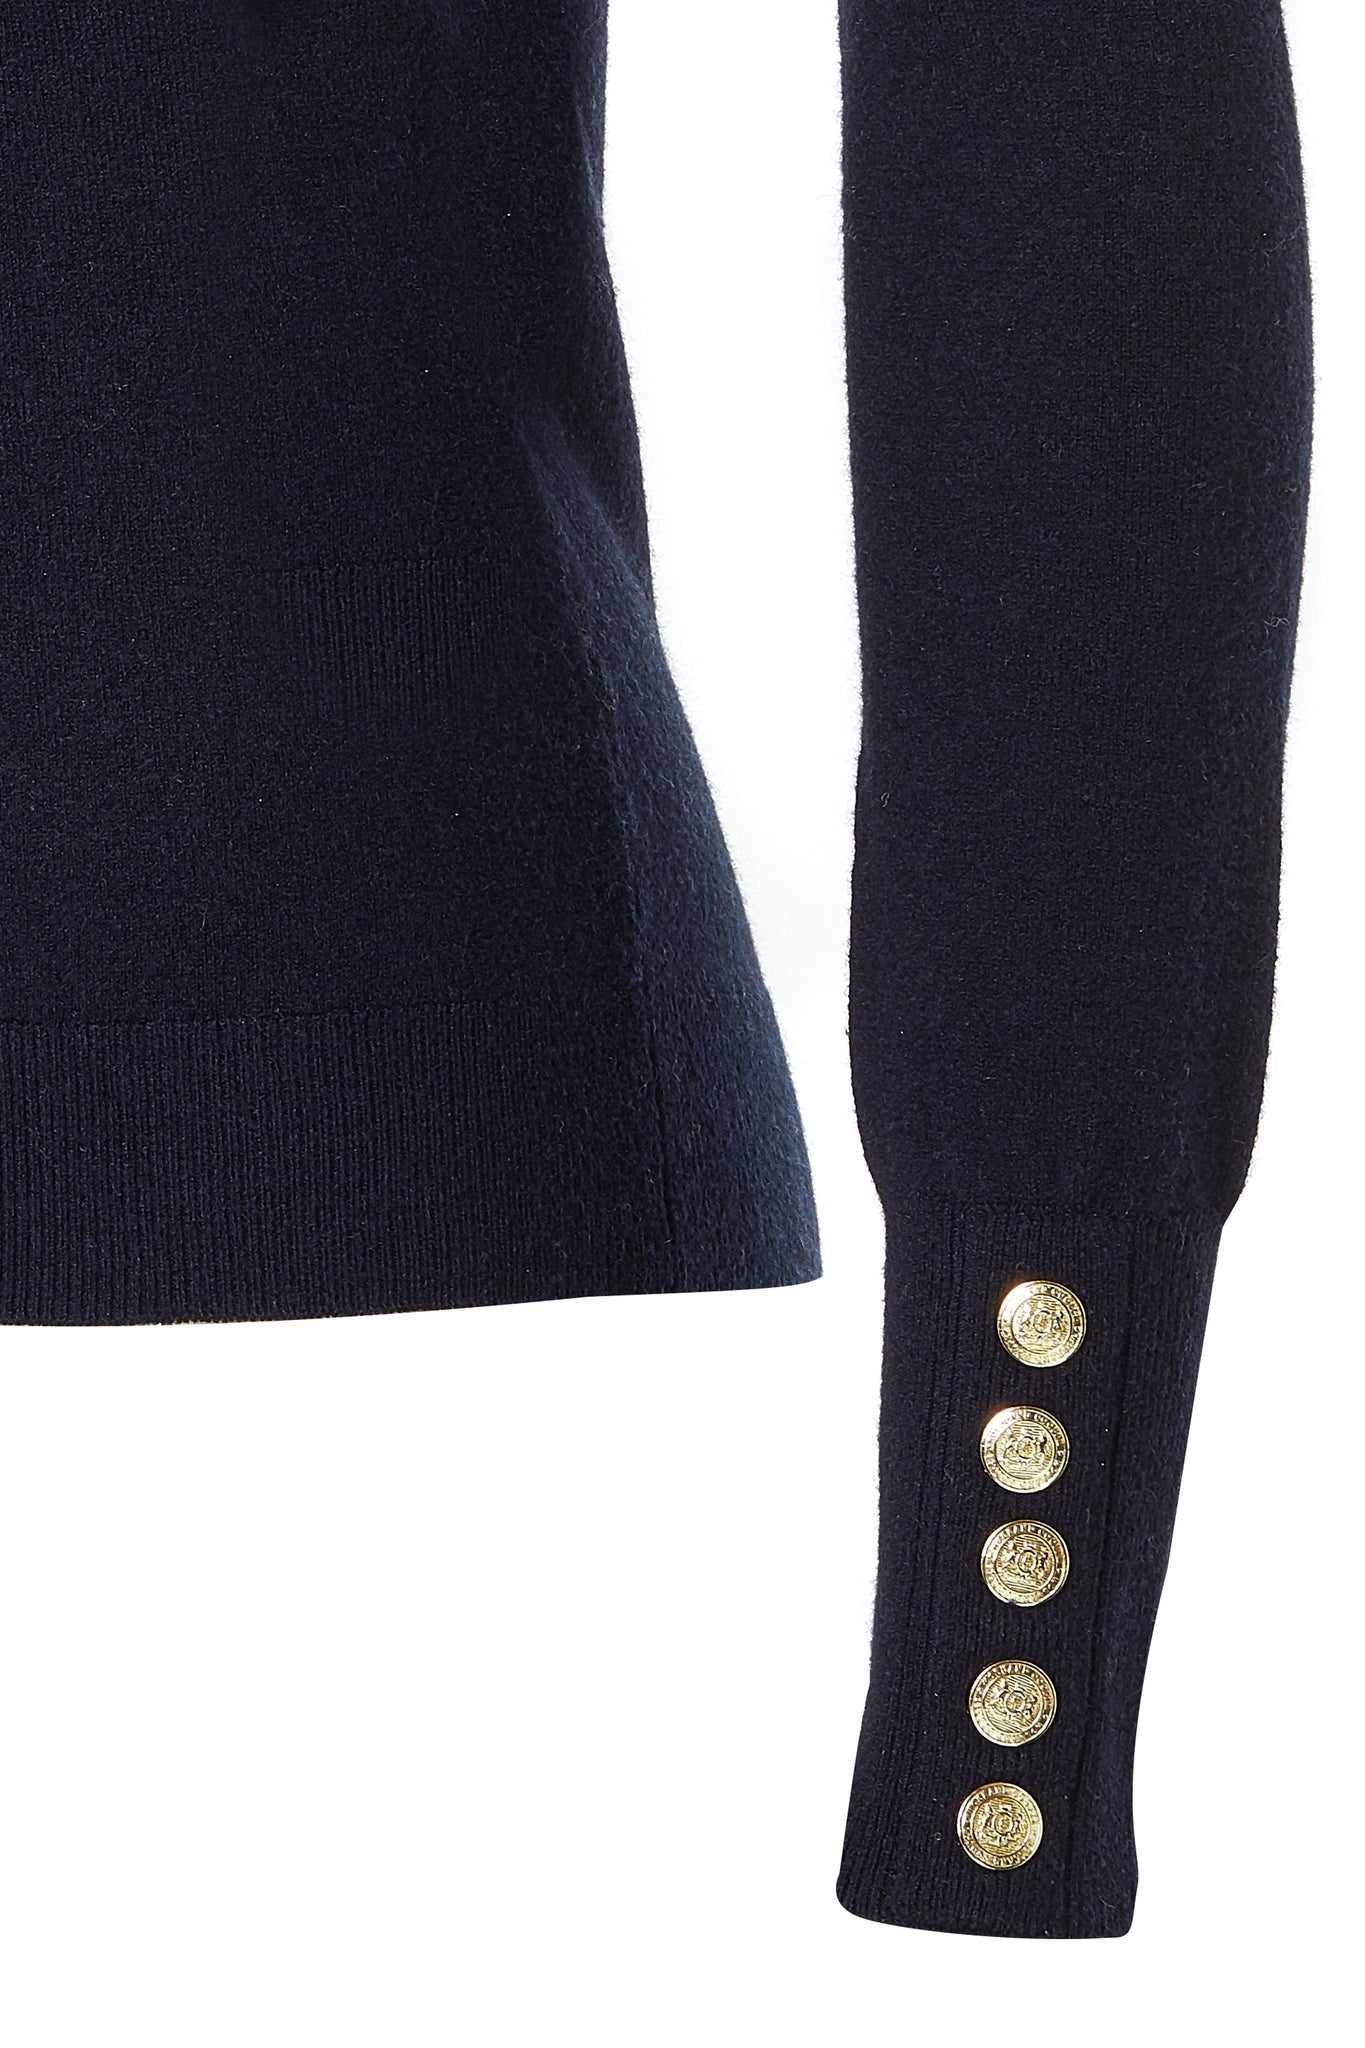 gold button detail at cuffs of super soft lightweight jumper in navy with ribbed roll neck collar, cuffs and hem